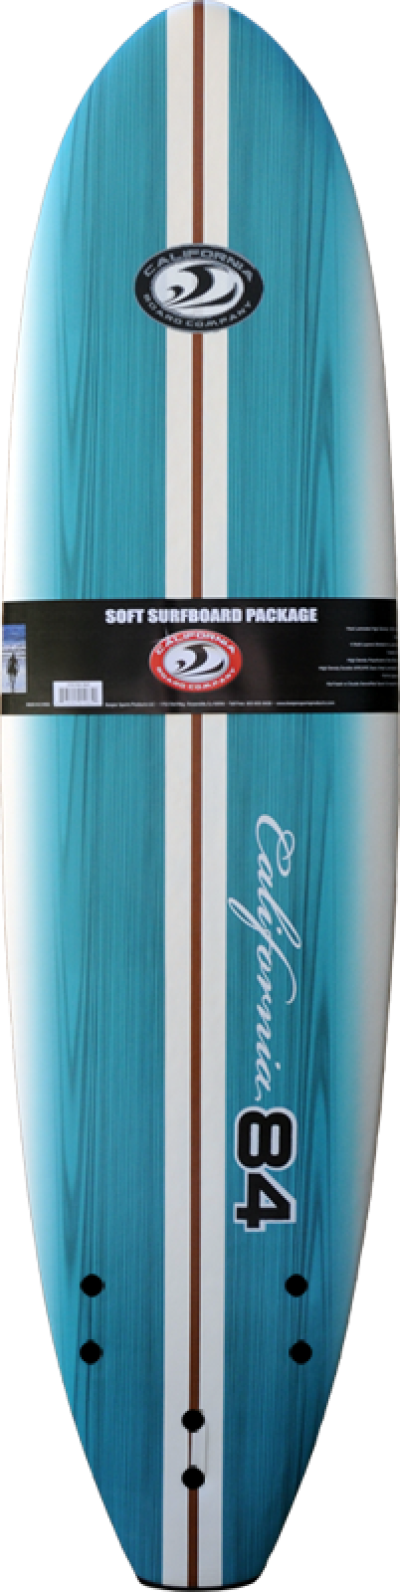 California84 Soft Surfboard Package PNG image